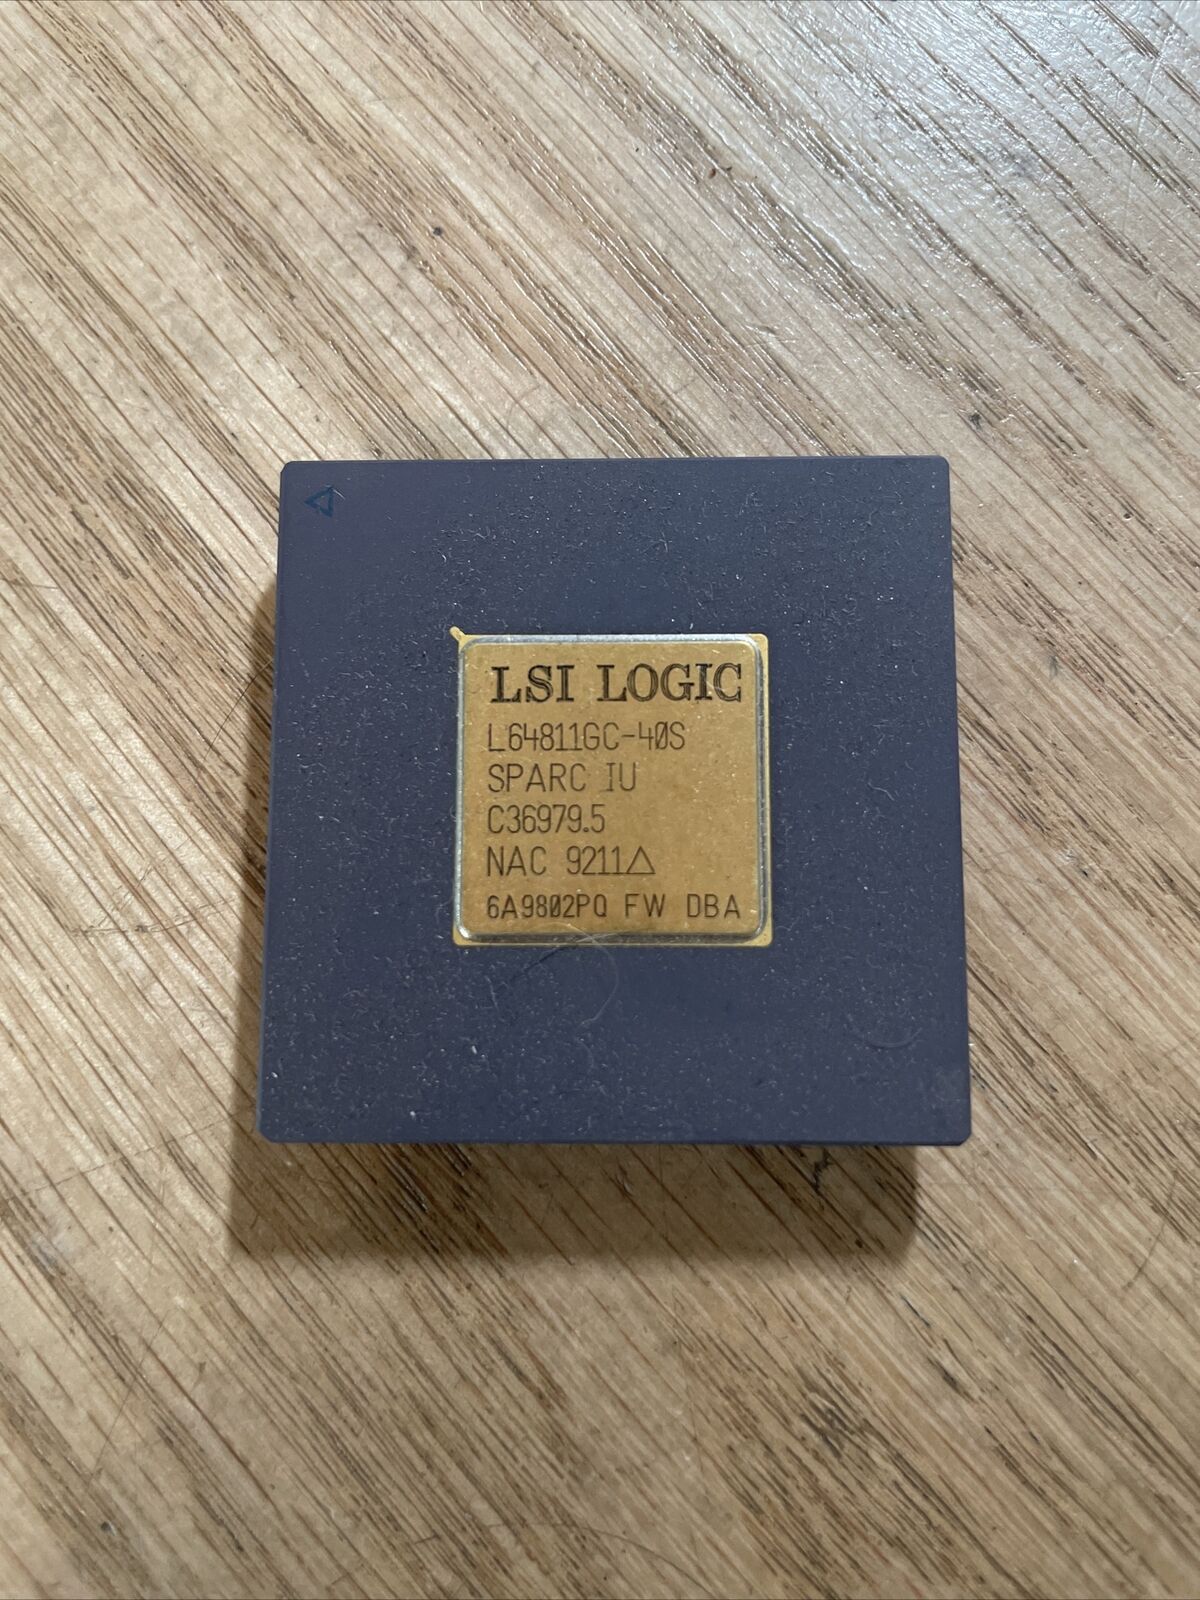 Vintage CPU Sparc Station made by LSI Logic L64811GC-40S gold and ceramic